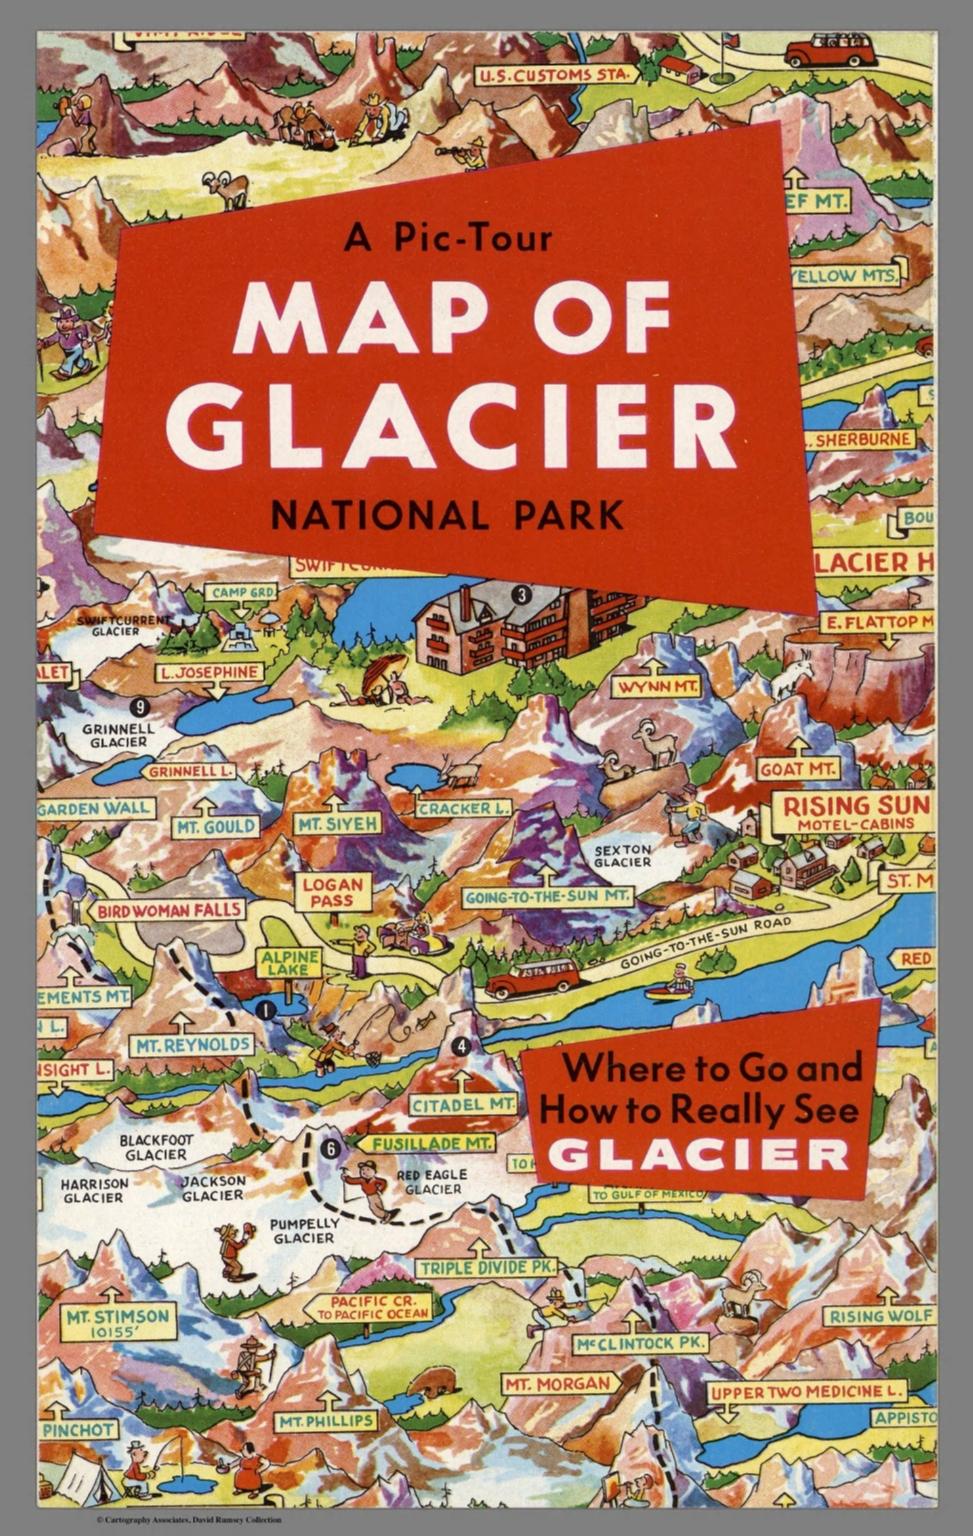 Covers: A Pic-Tour Map of Glacier National Park. Where to Go and How to Really See Glacier.